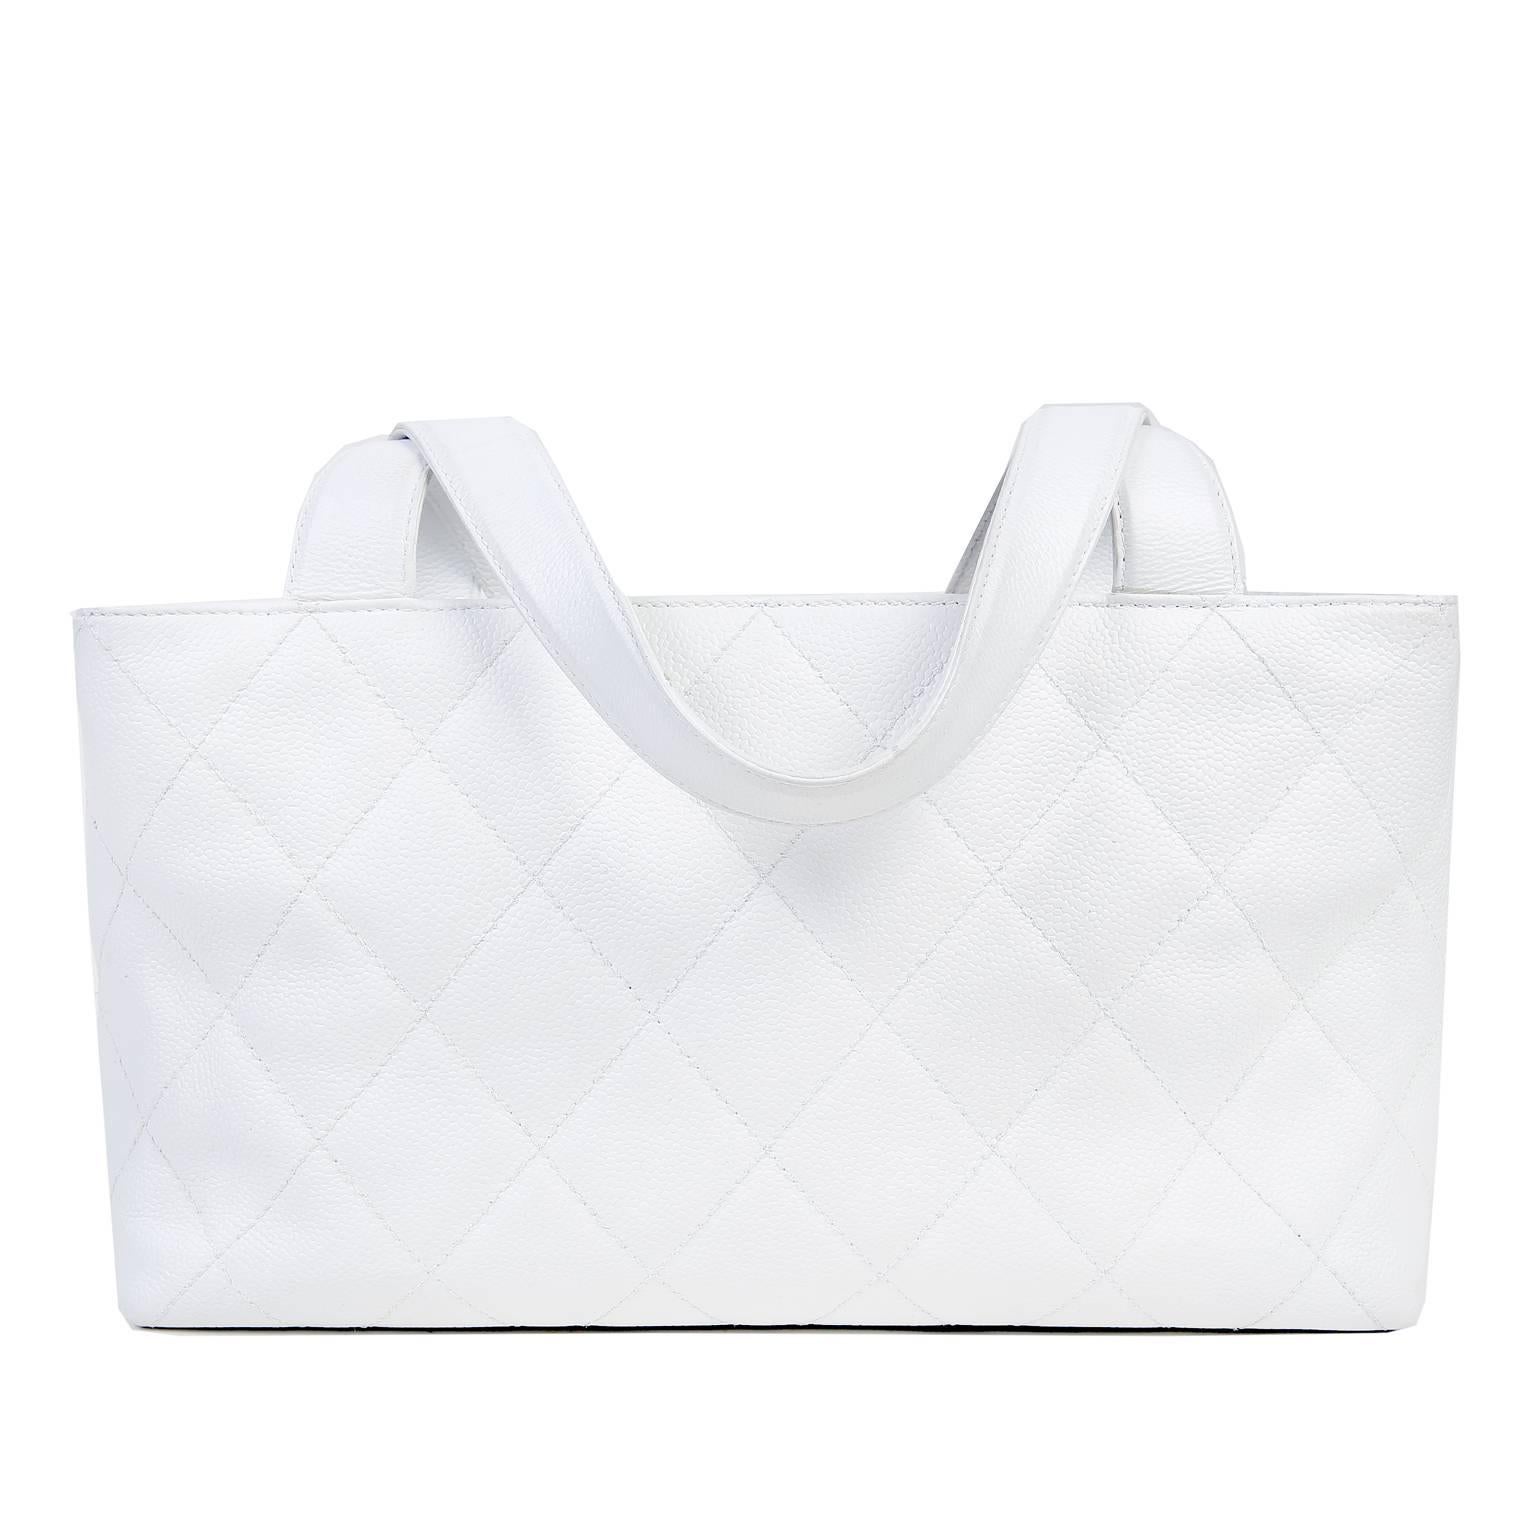 This Authentic Chanel White Caviar Tote is in pristine condition, appearing very rarely carried and carefully stored.  A timeless piece that is certain to become a wardrobe favorite, this classic Chanel is a great find. 

Snowy white caviar